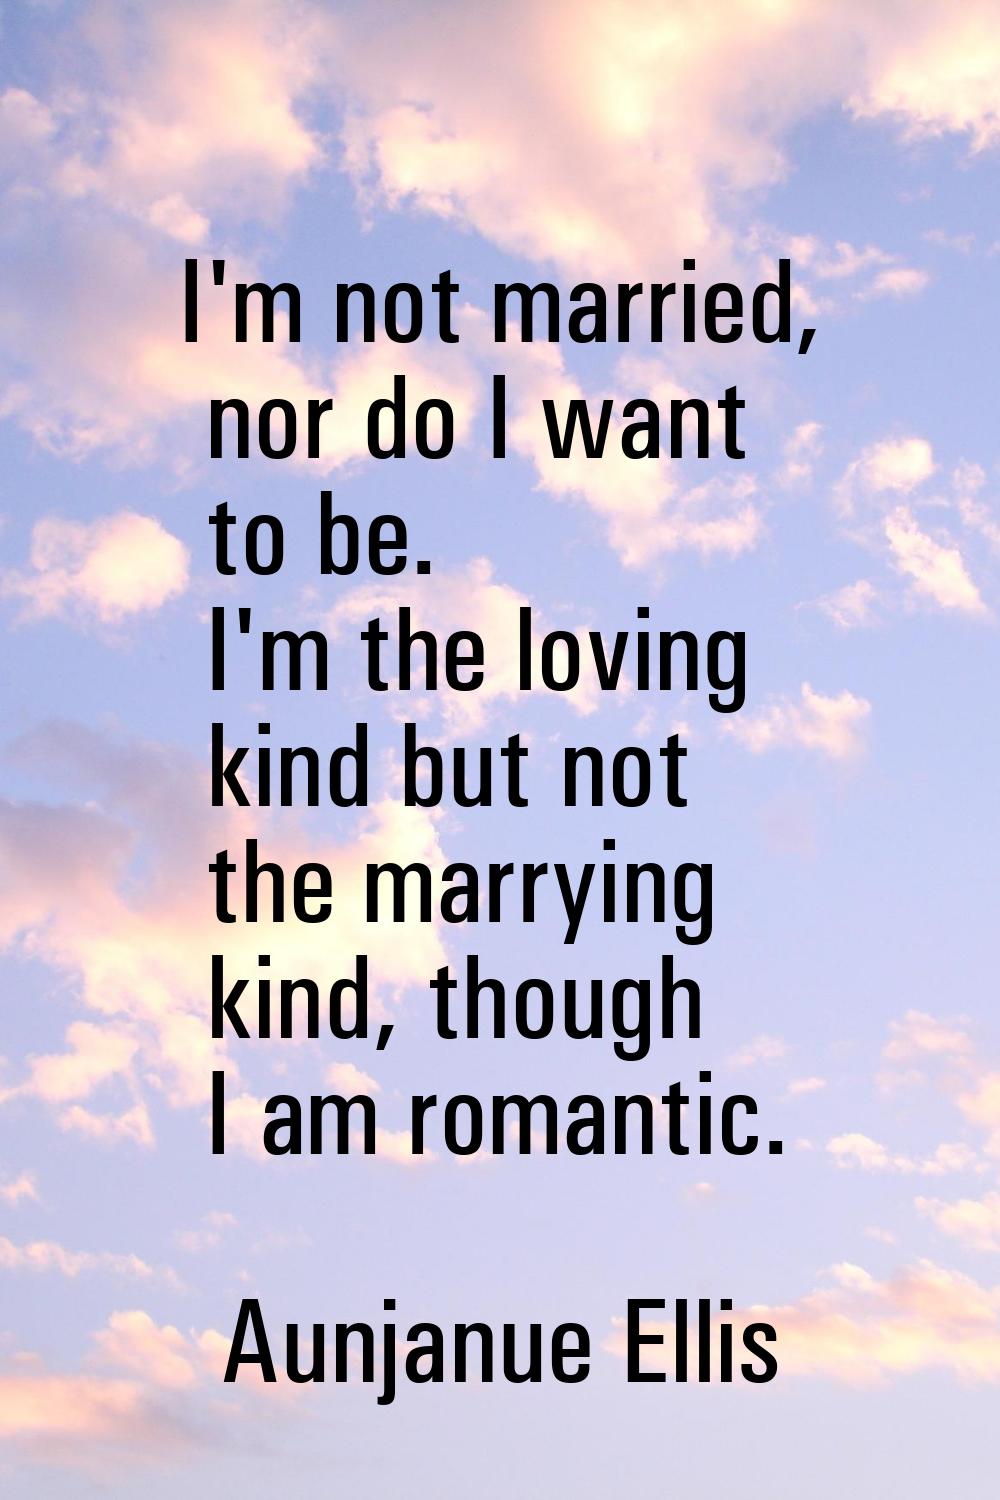 I'm not married, nor do I want to be. I'm the loving kind but not the marrying kind, though I am ro